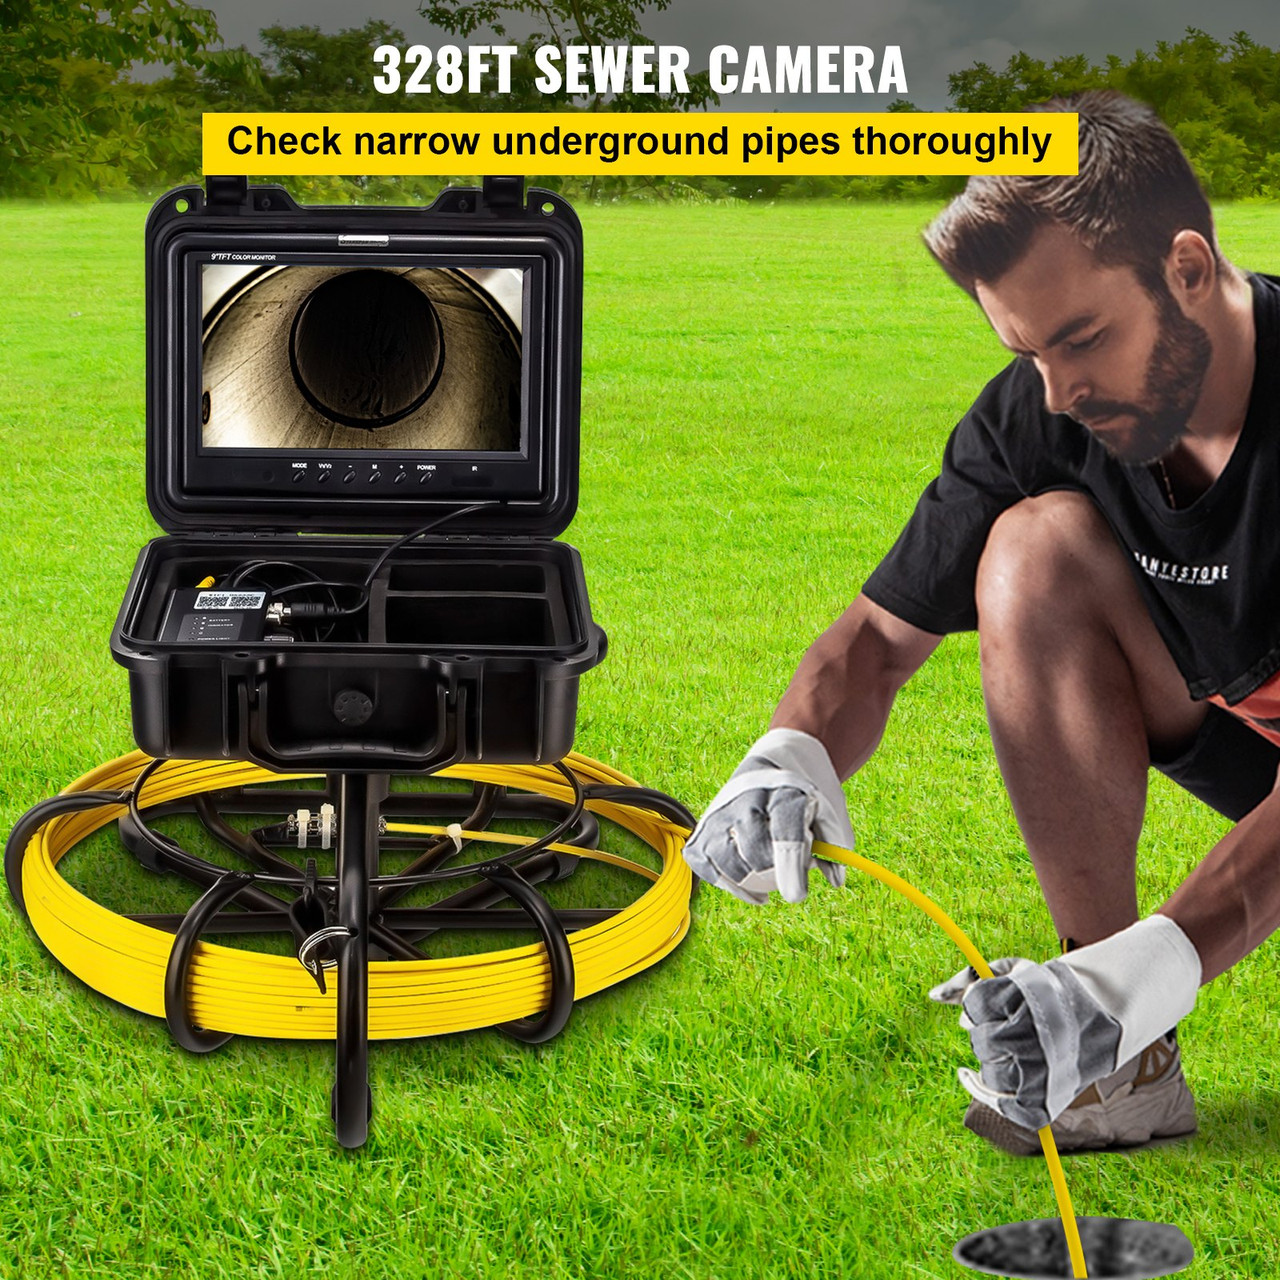 Pipe Sewer Inspection Sewer Camera DVR HD 9" Pipe Camera with 328ft Cable